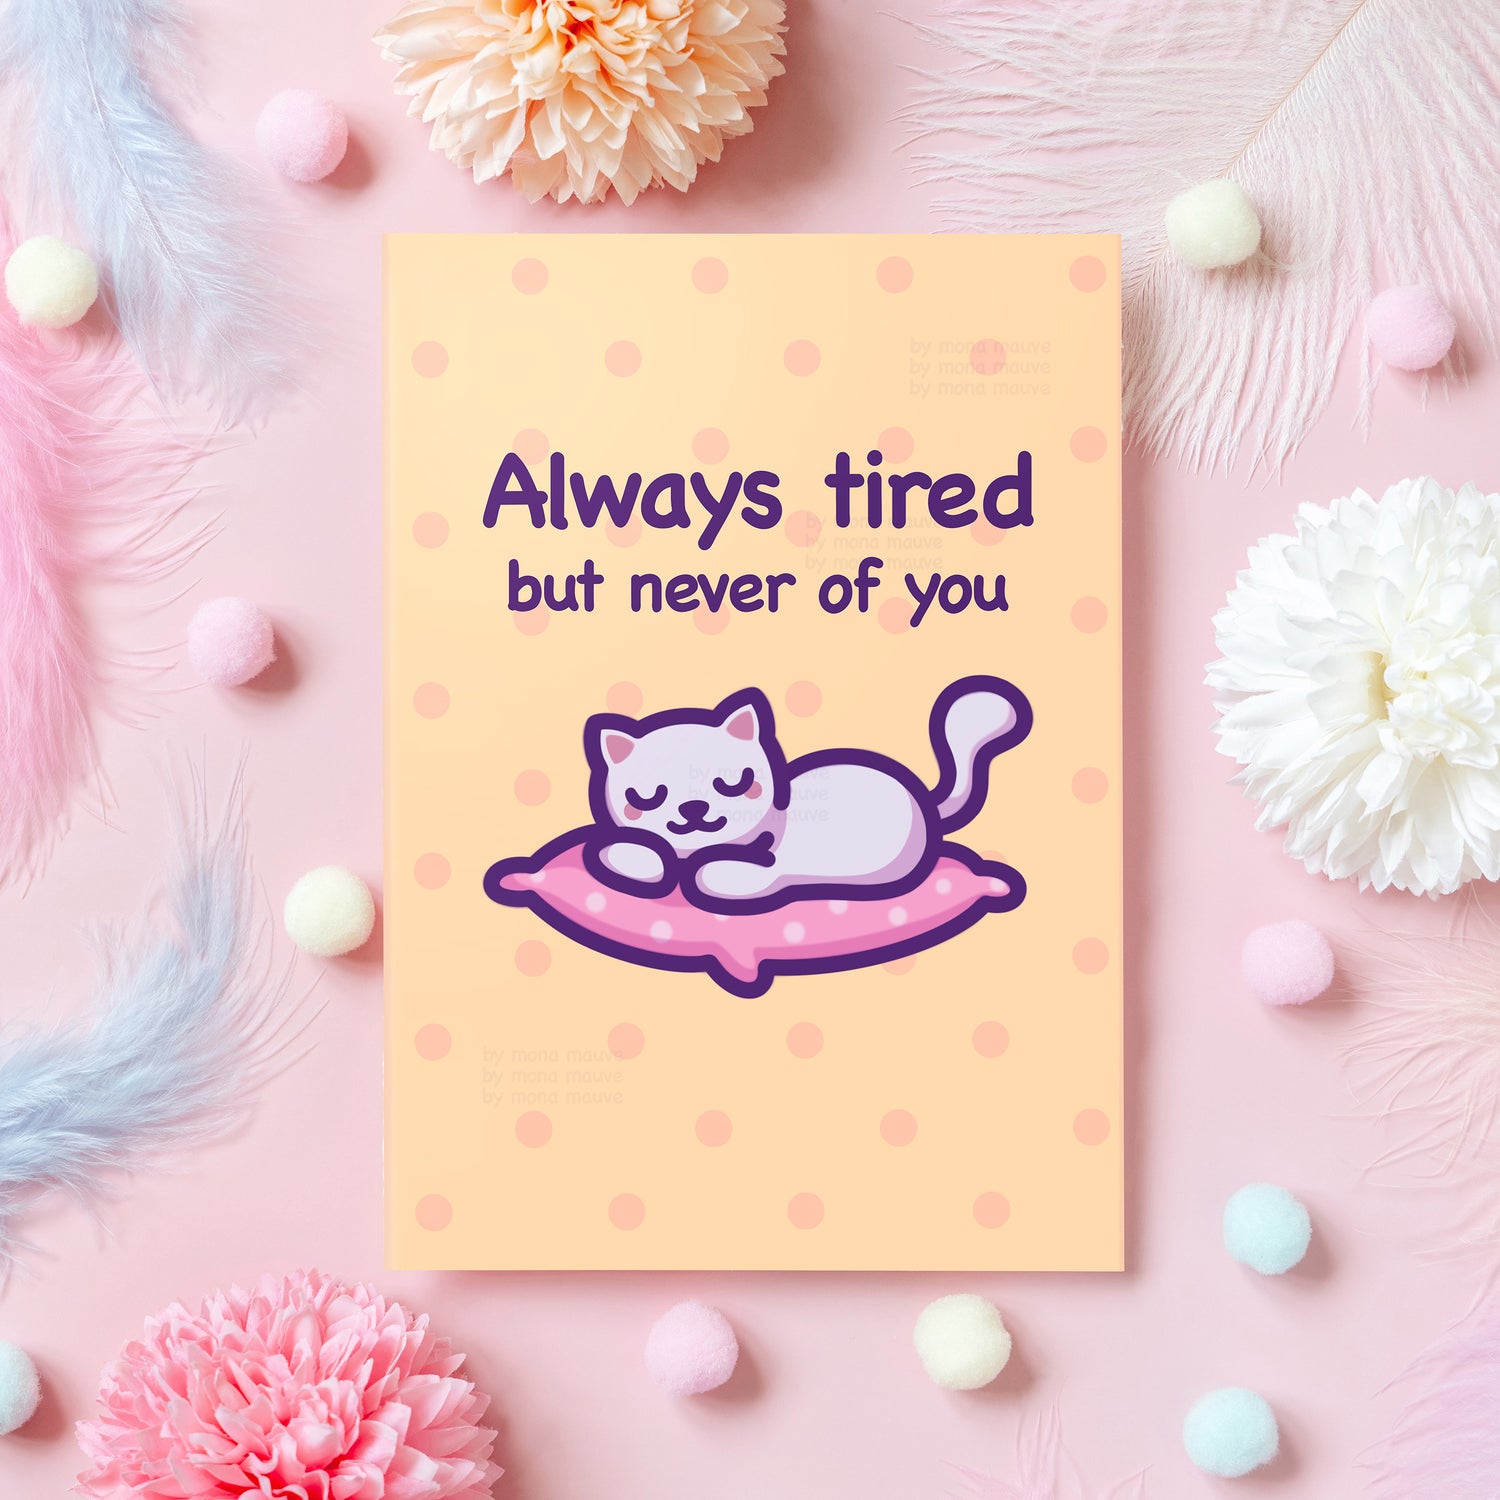 A card with a sleeping cat that reads "always tired, but never of you"